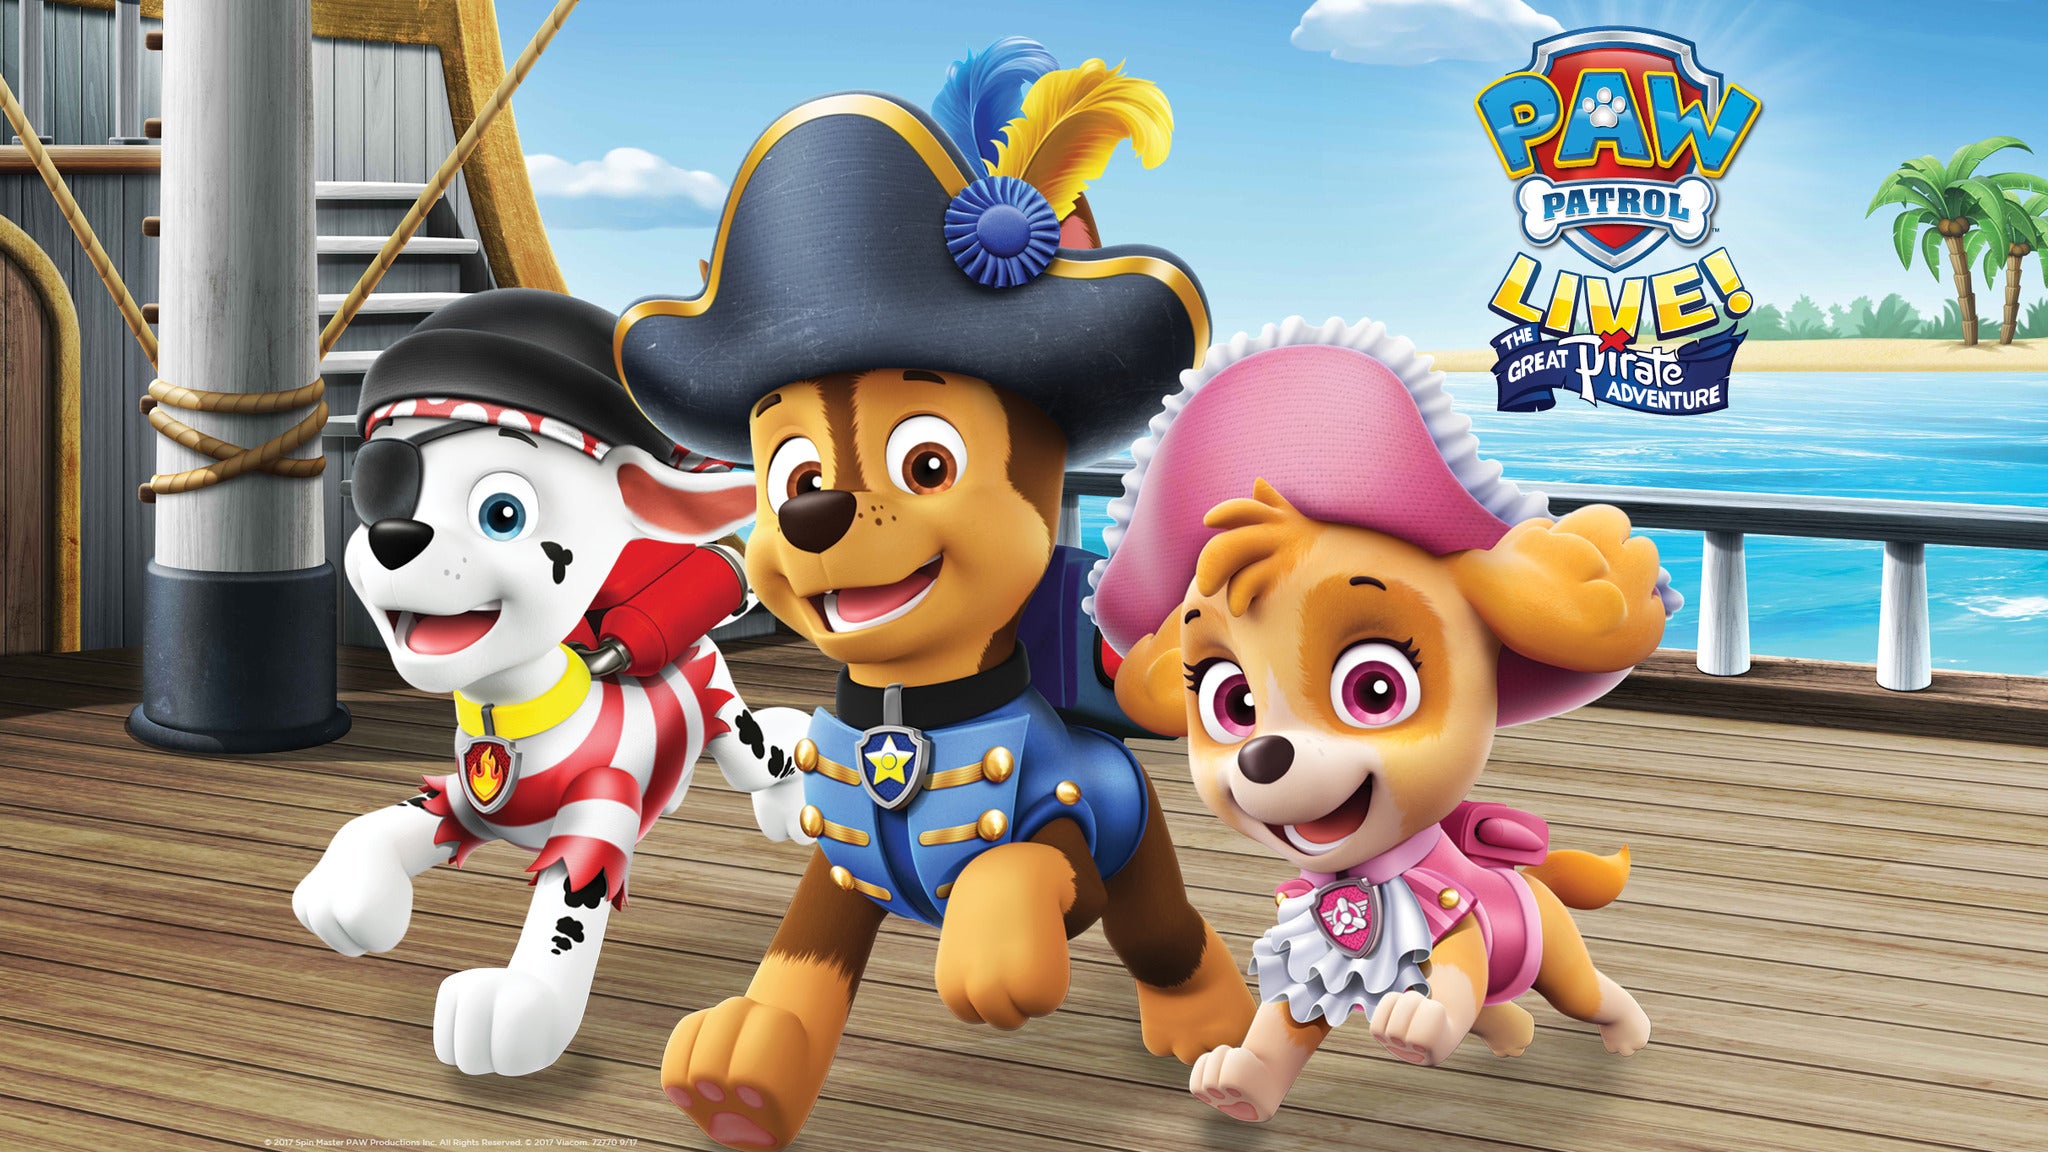 PAW Patrol Live! The Great Pirate Adventure in Newark promo photo for Citi® Cardmember presale offer code